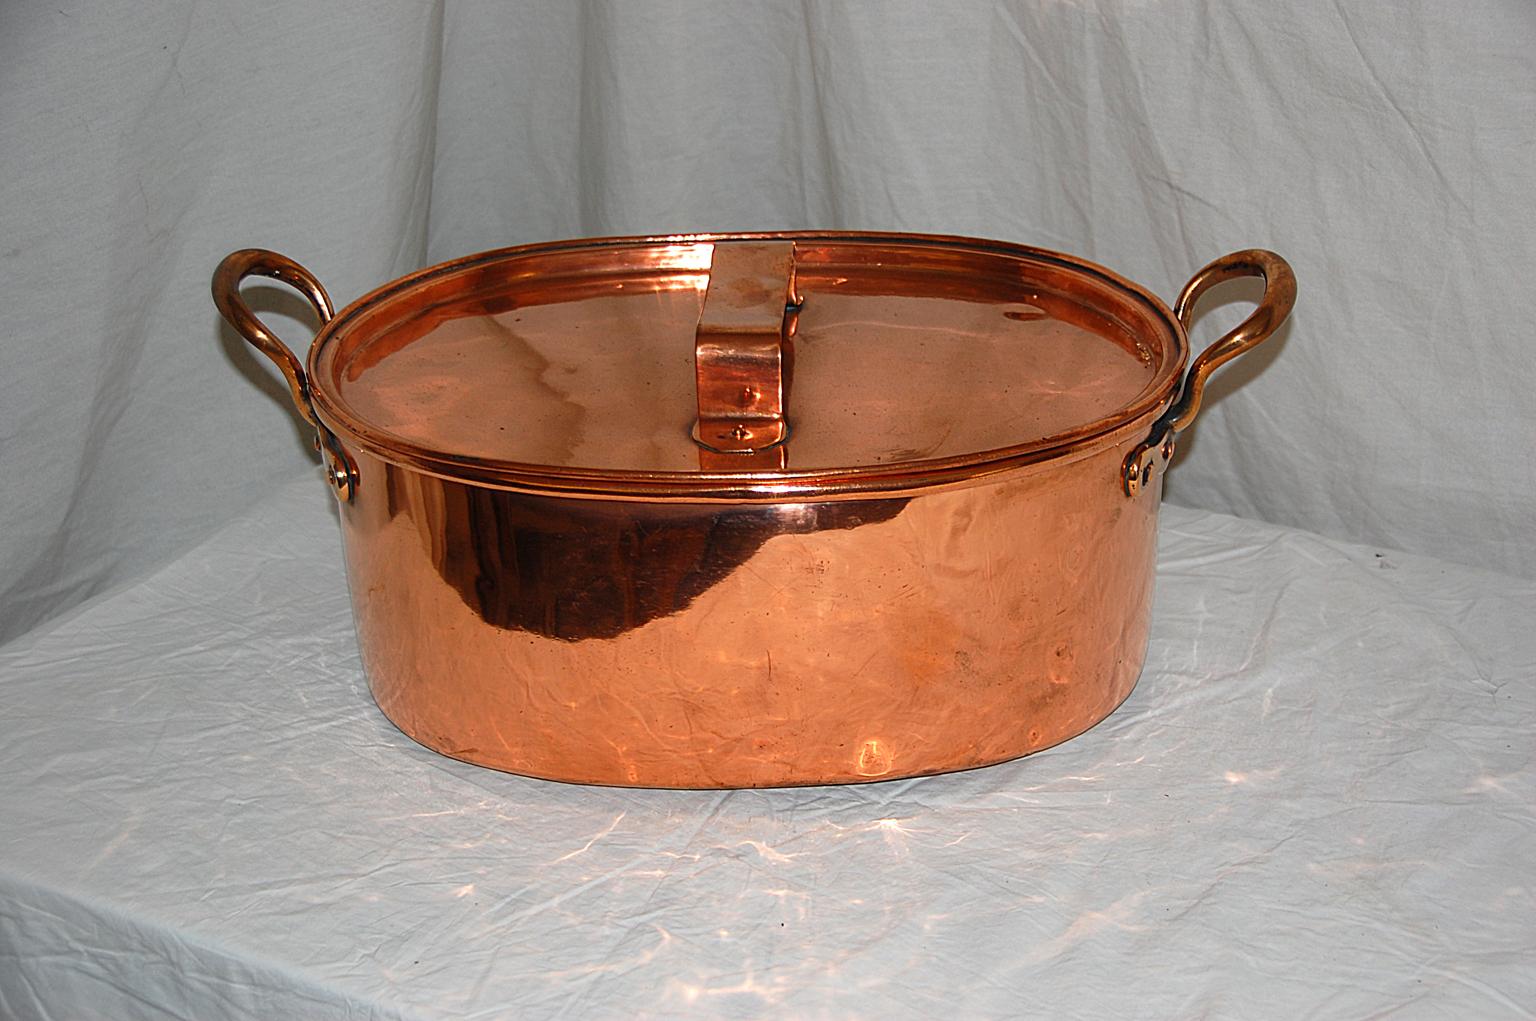 English early 19th century oval copper roasting pan or cauldron with lid. This heavy gauge copper pan is of dovetailed construction, with rolled edge, cast handles, and lift off lid with loop handle. This pan was used to roast meat or as a cauldron